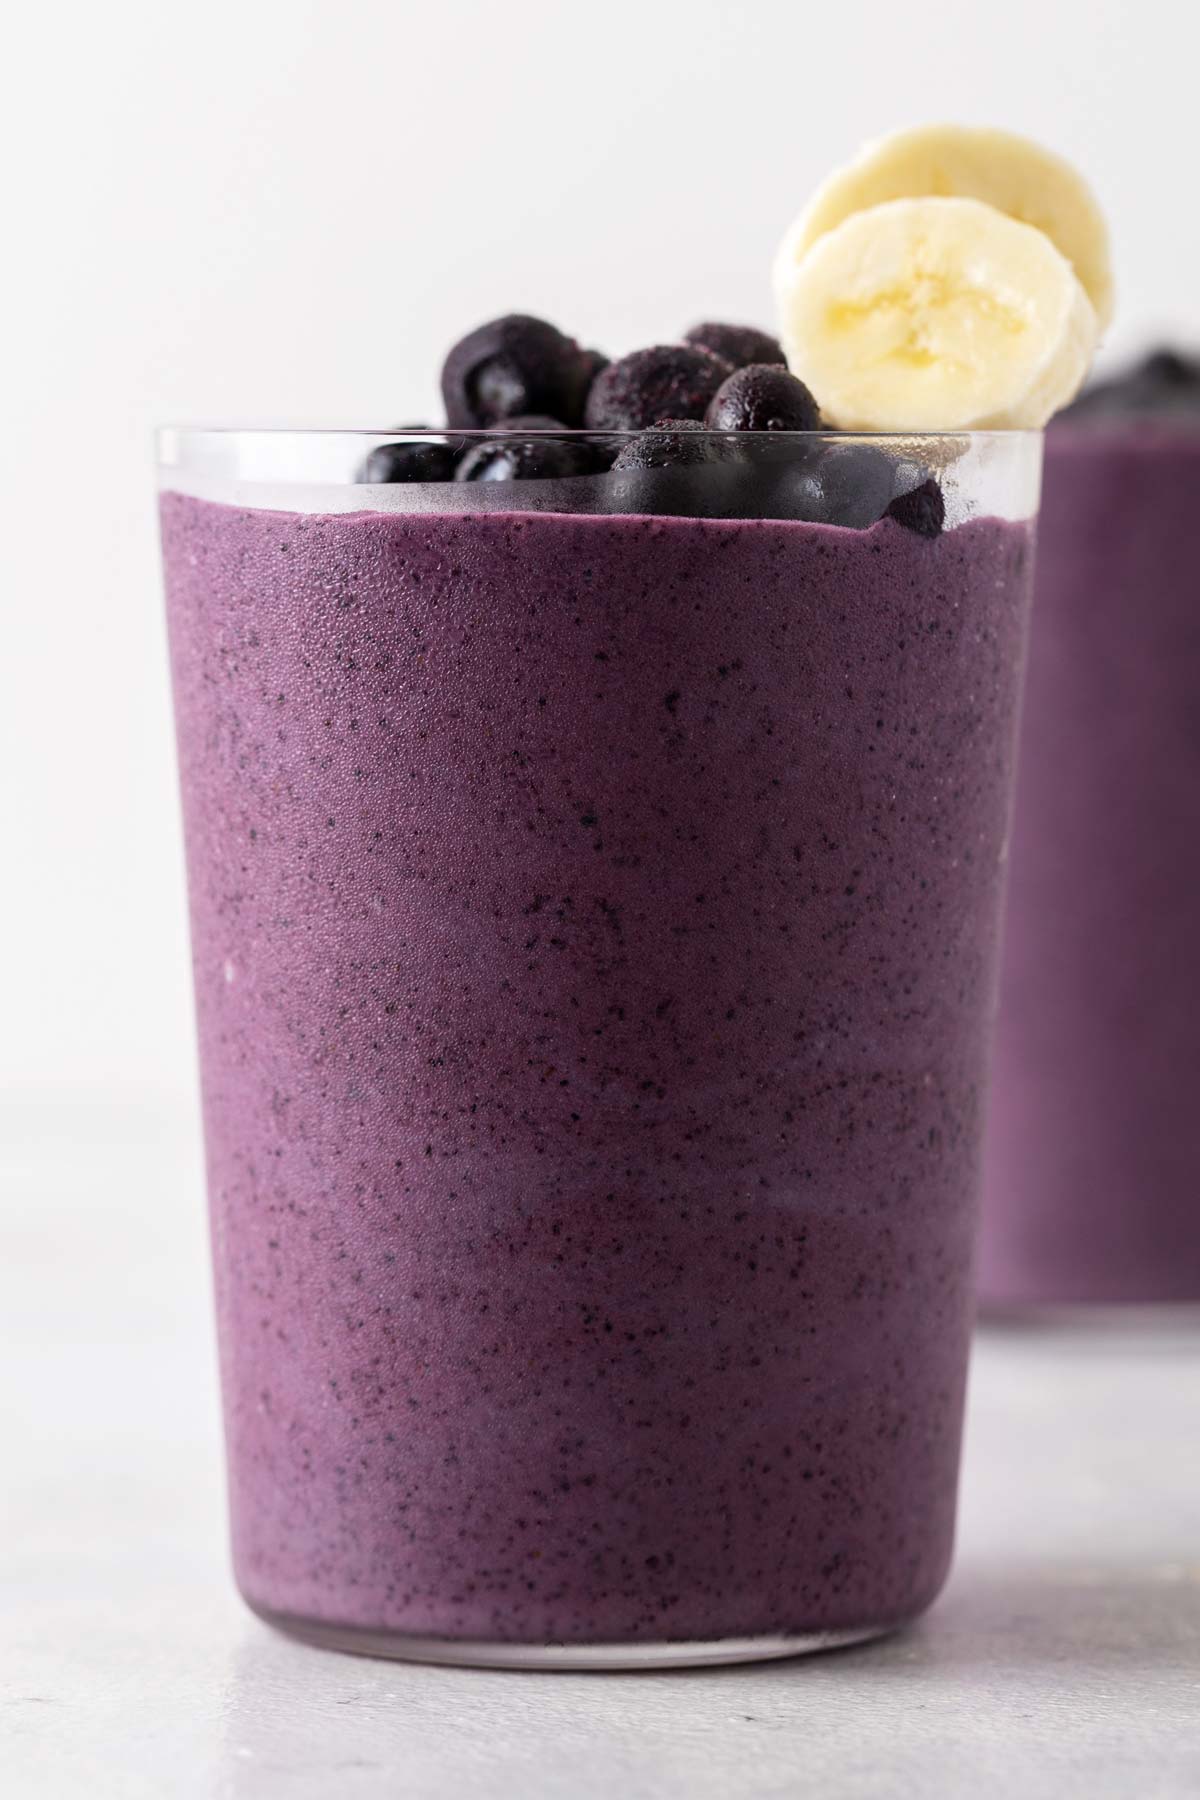 Blueberry smoothie in a cup.